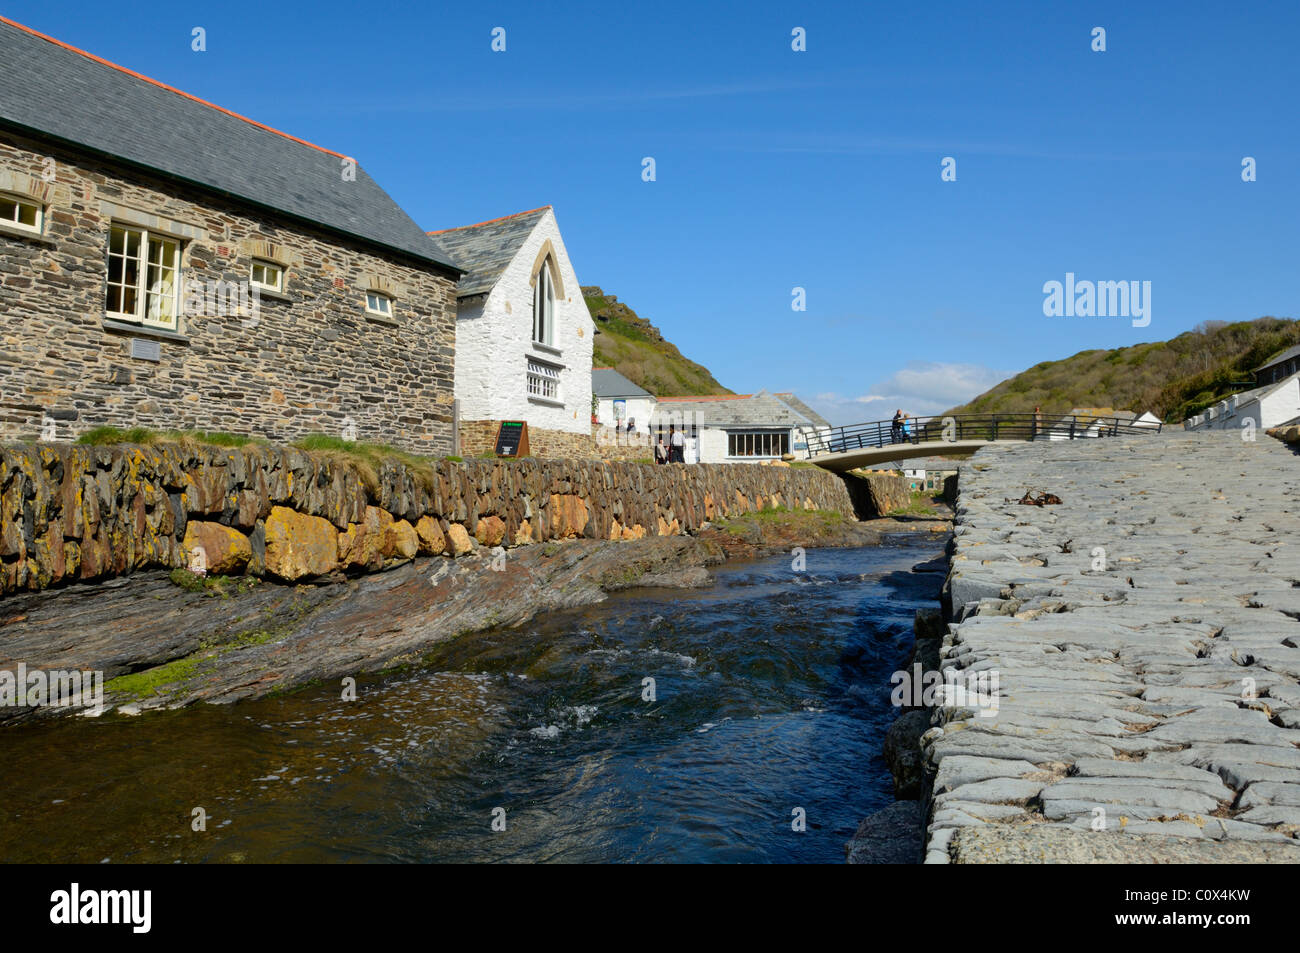 The River Valency at Boscastle Harbour, Cornwall, England. Stock Photo